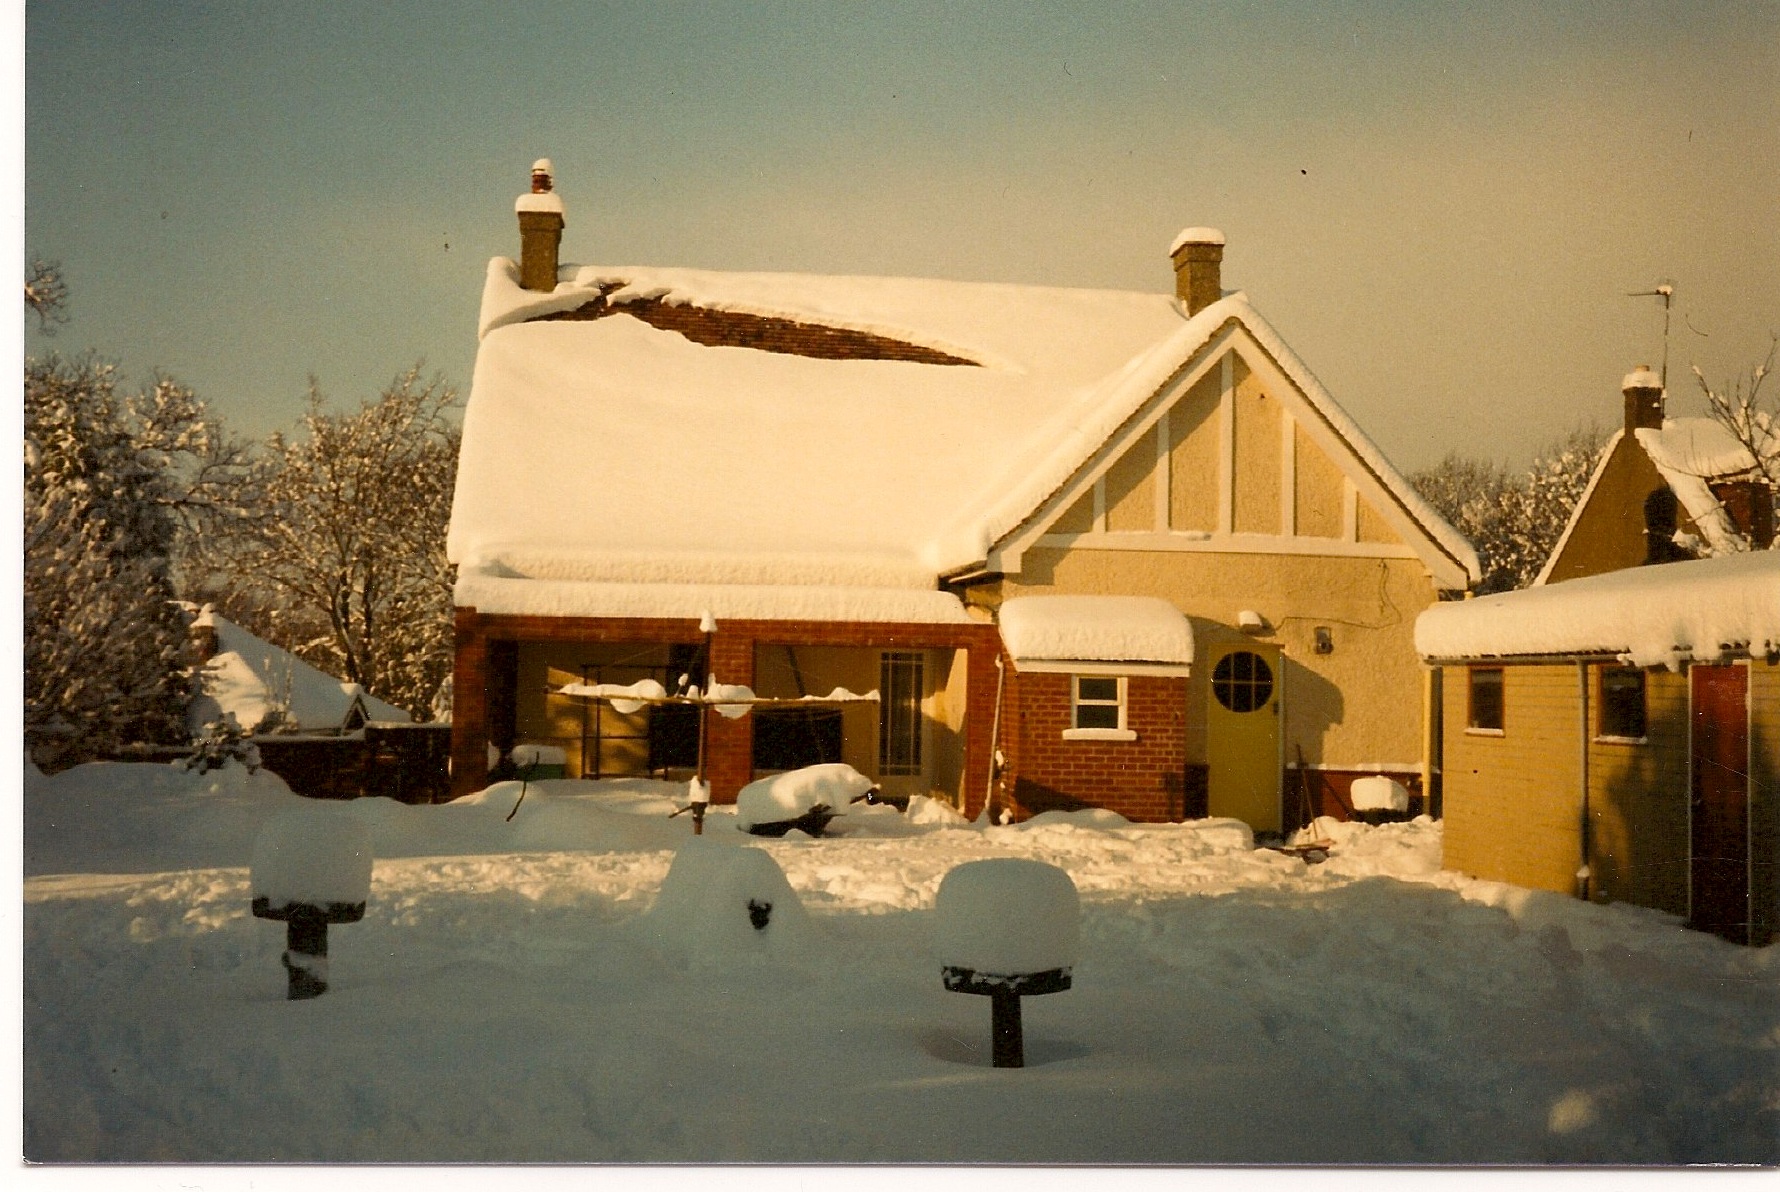  Snow at 27 Wigmore Road in 1987